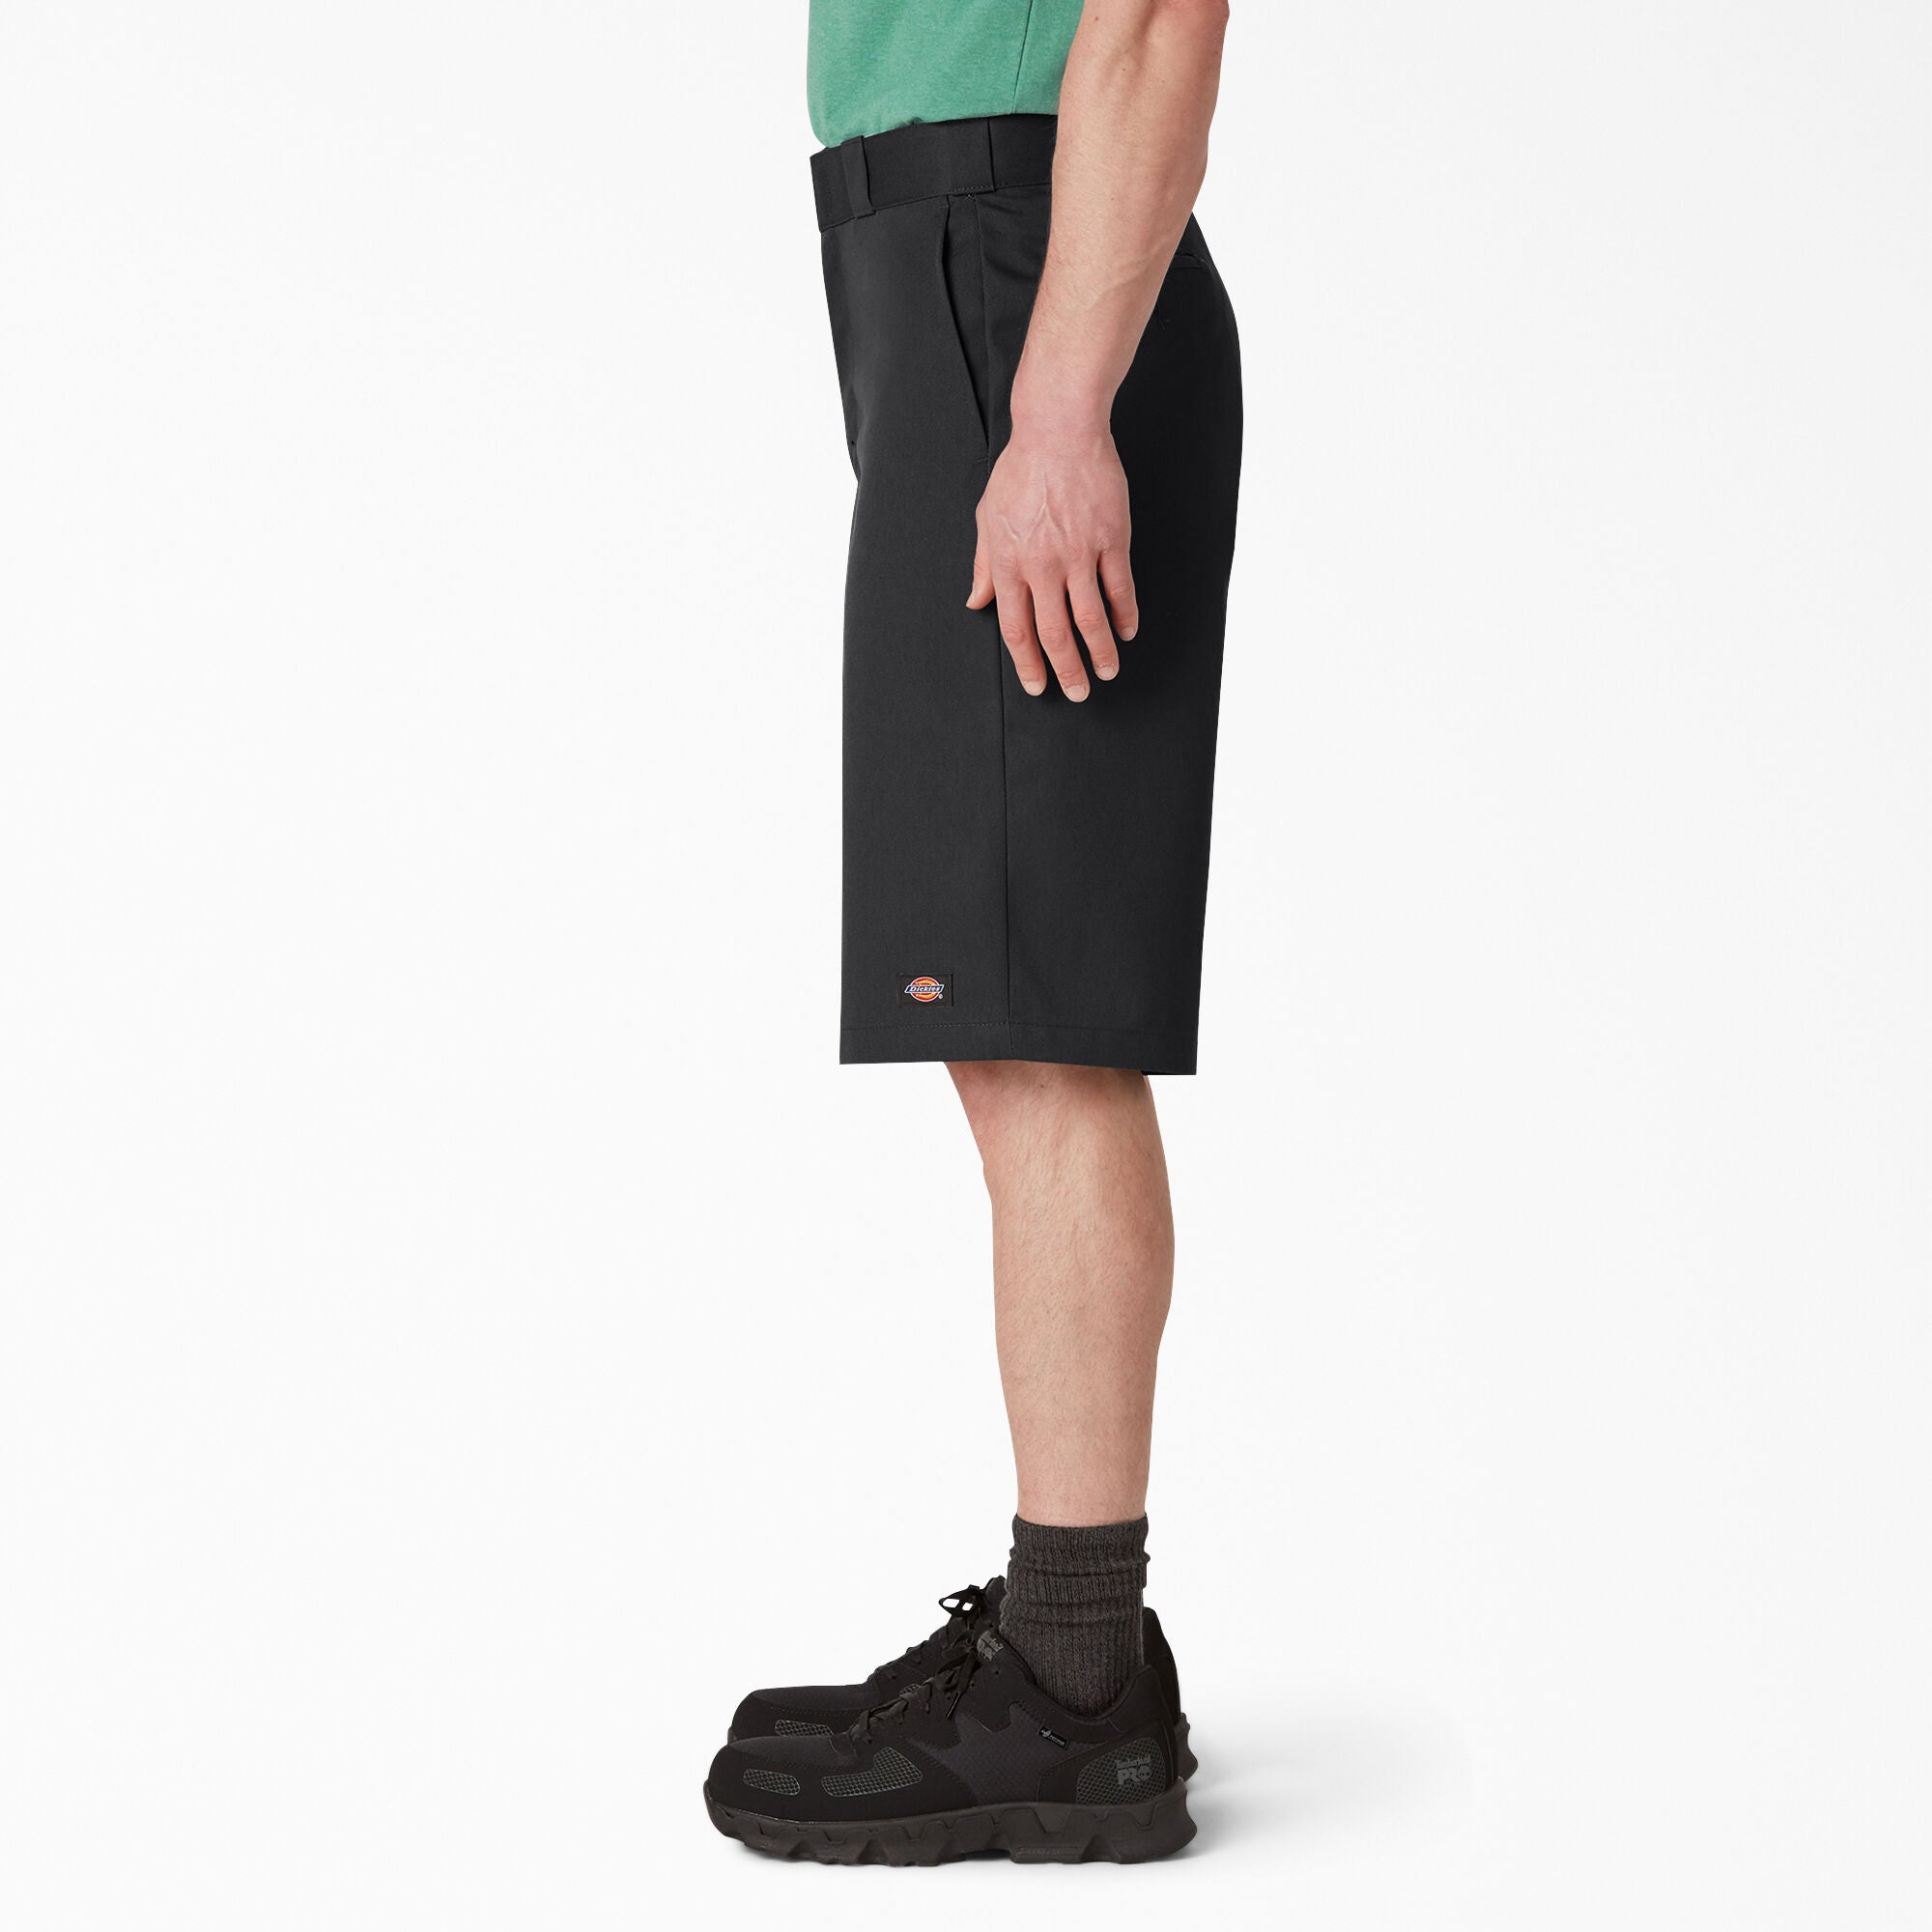 Dickies Loose Fit Flat Front Work Shorts, 13", Black